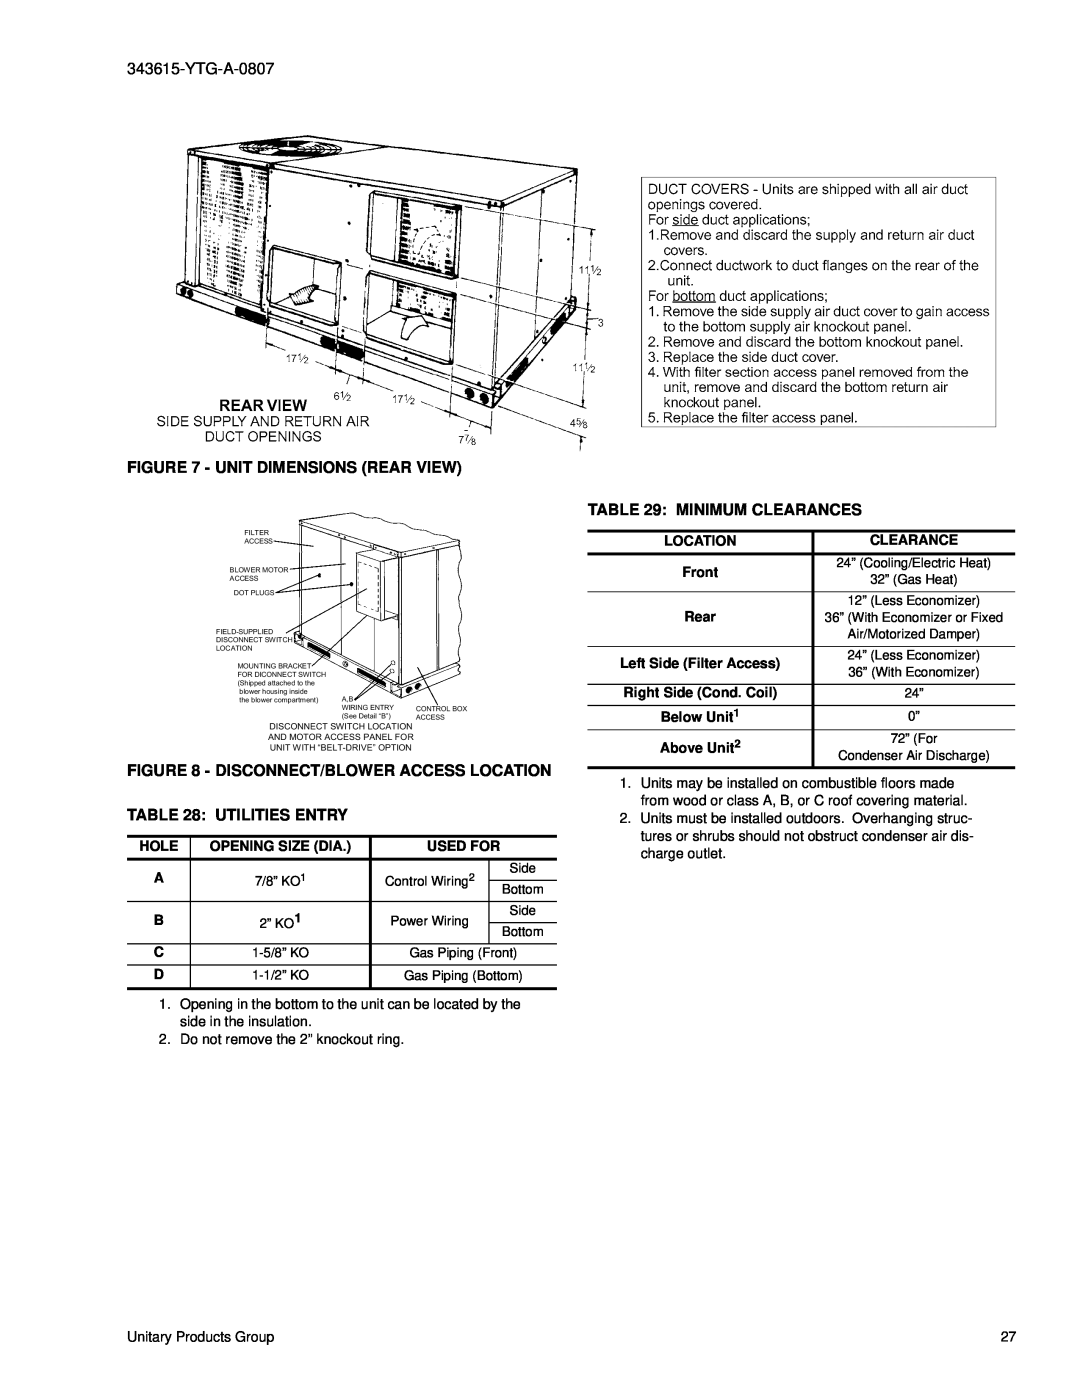 York DY 036 Unit Dimensions Rear View, Minimum Clearances, Disconnect/Blower Access Location, Utilities Entry, Hole 